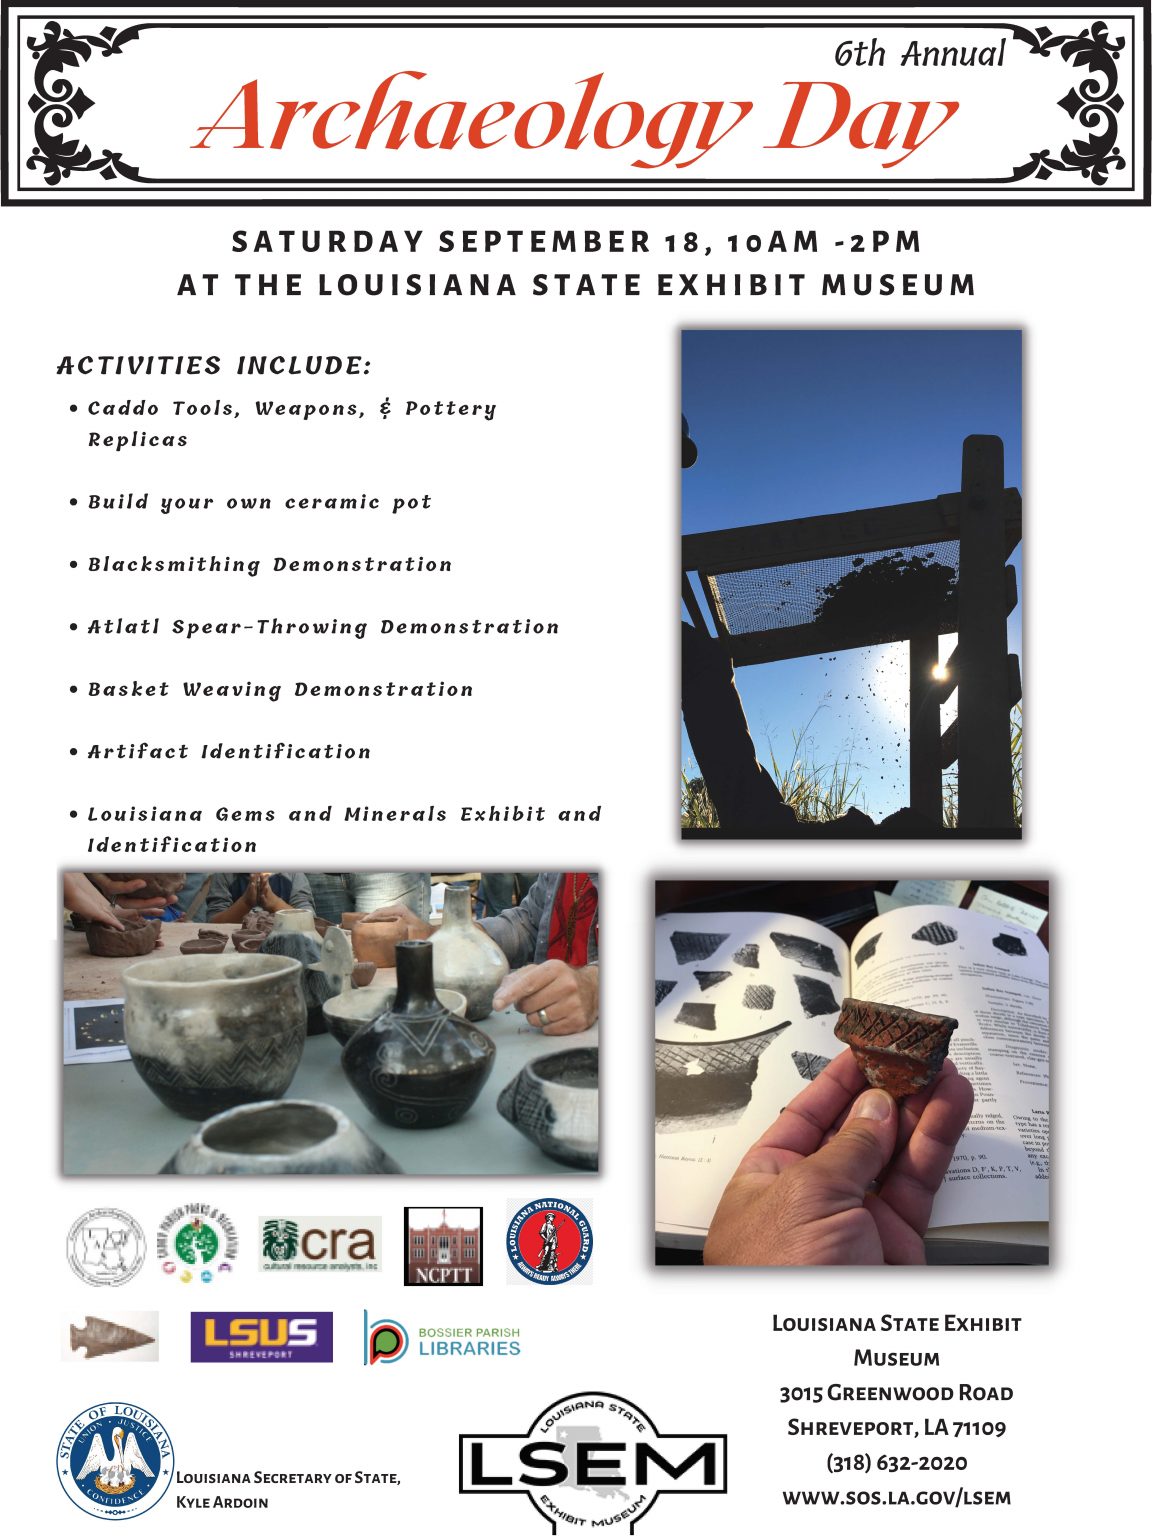 AIA Event Listings 6th Annual Archaeology Day Louisiana Division of